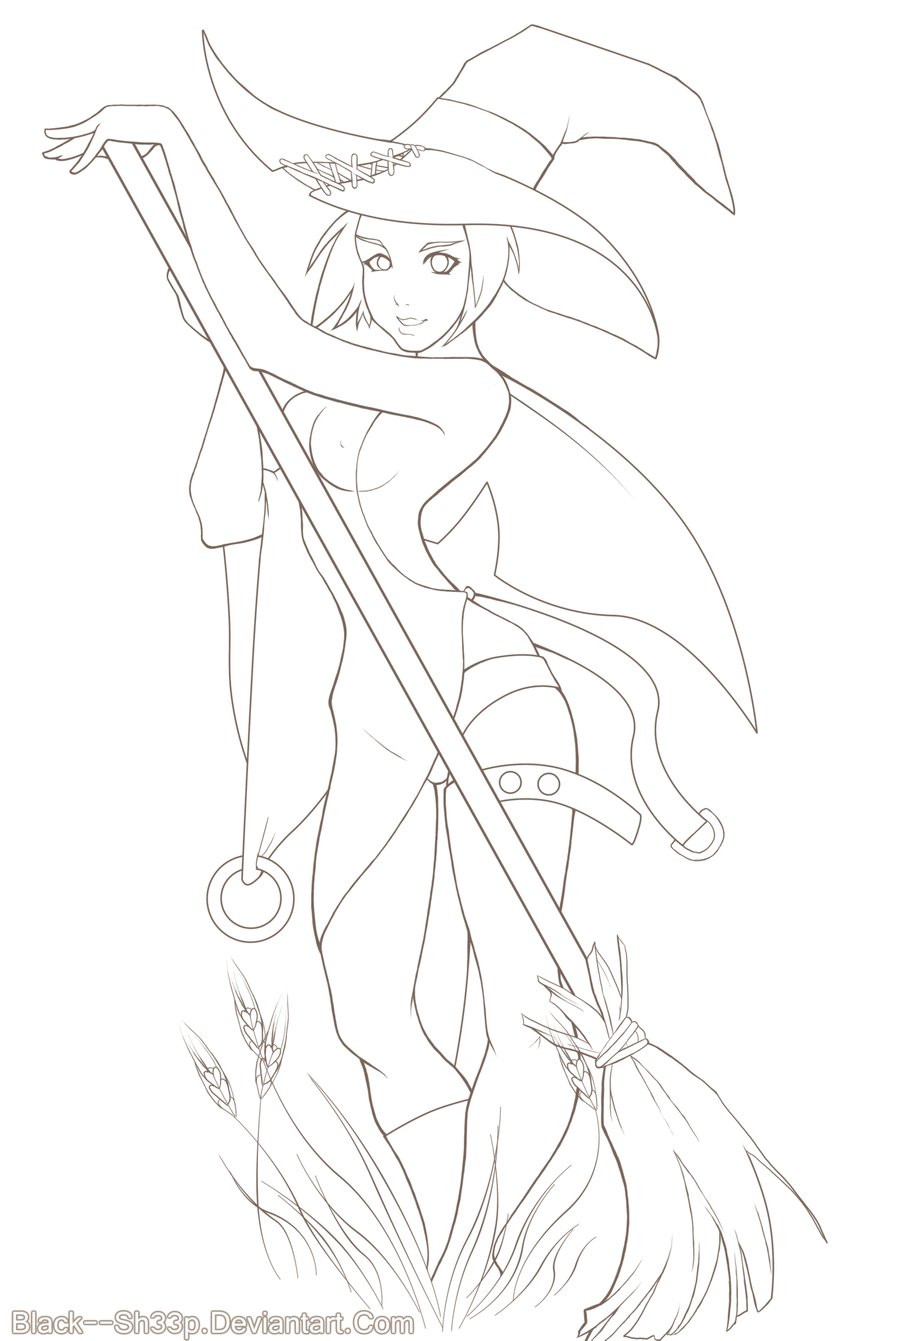 Hot Whichs Coloring Pages For Teens
 y Witch Colour Me by Black Sh33p on DeviantArt